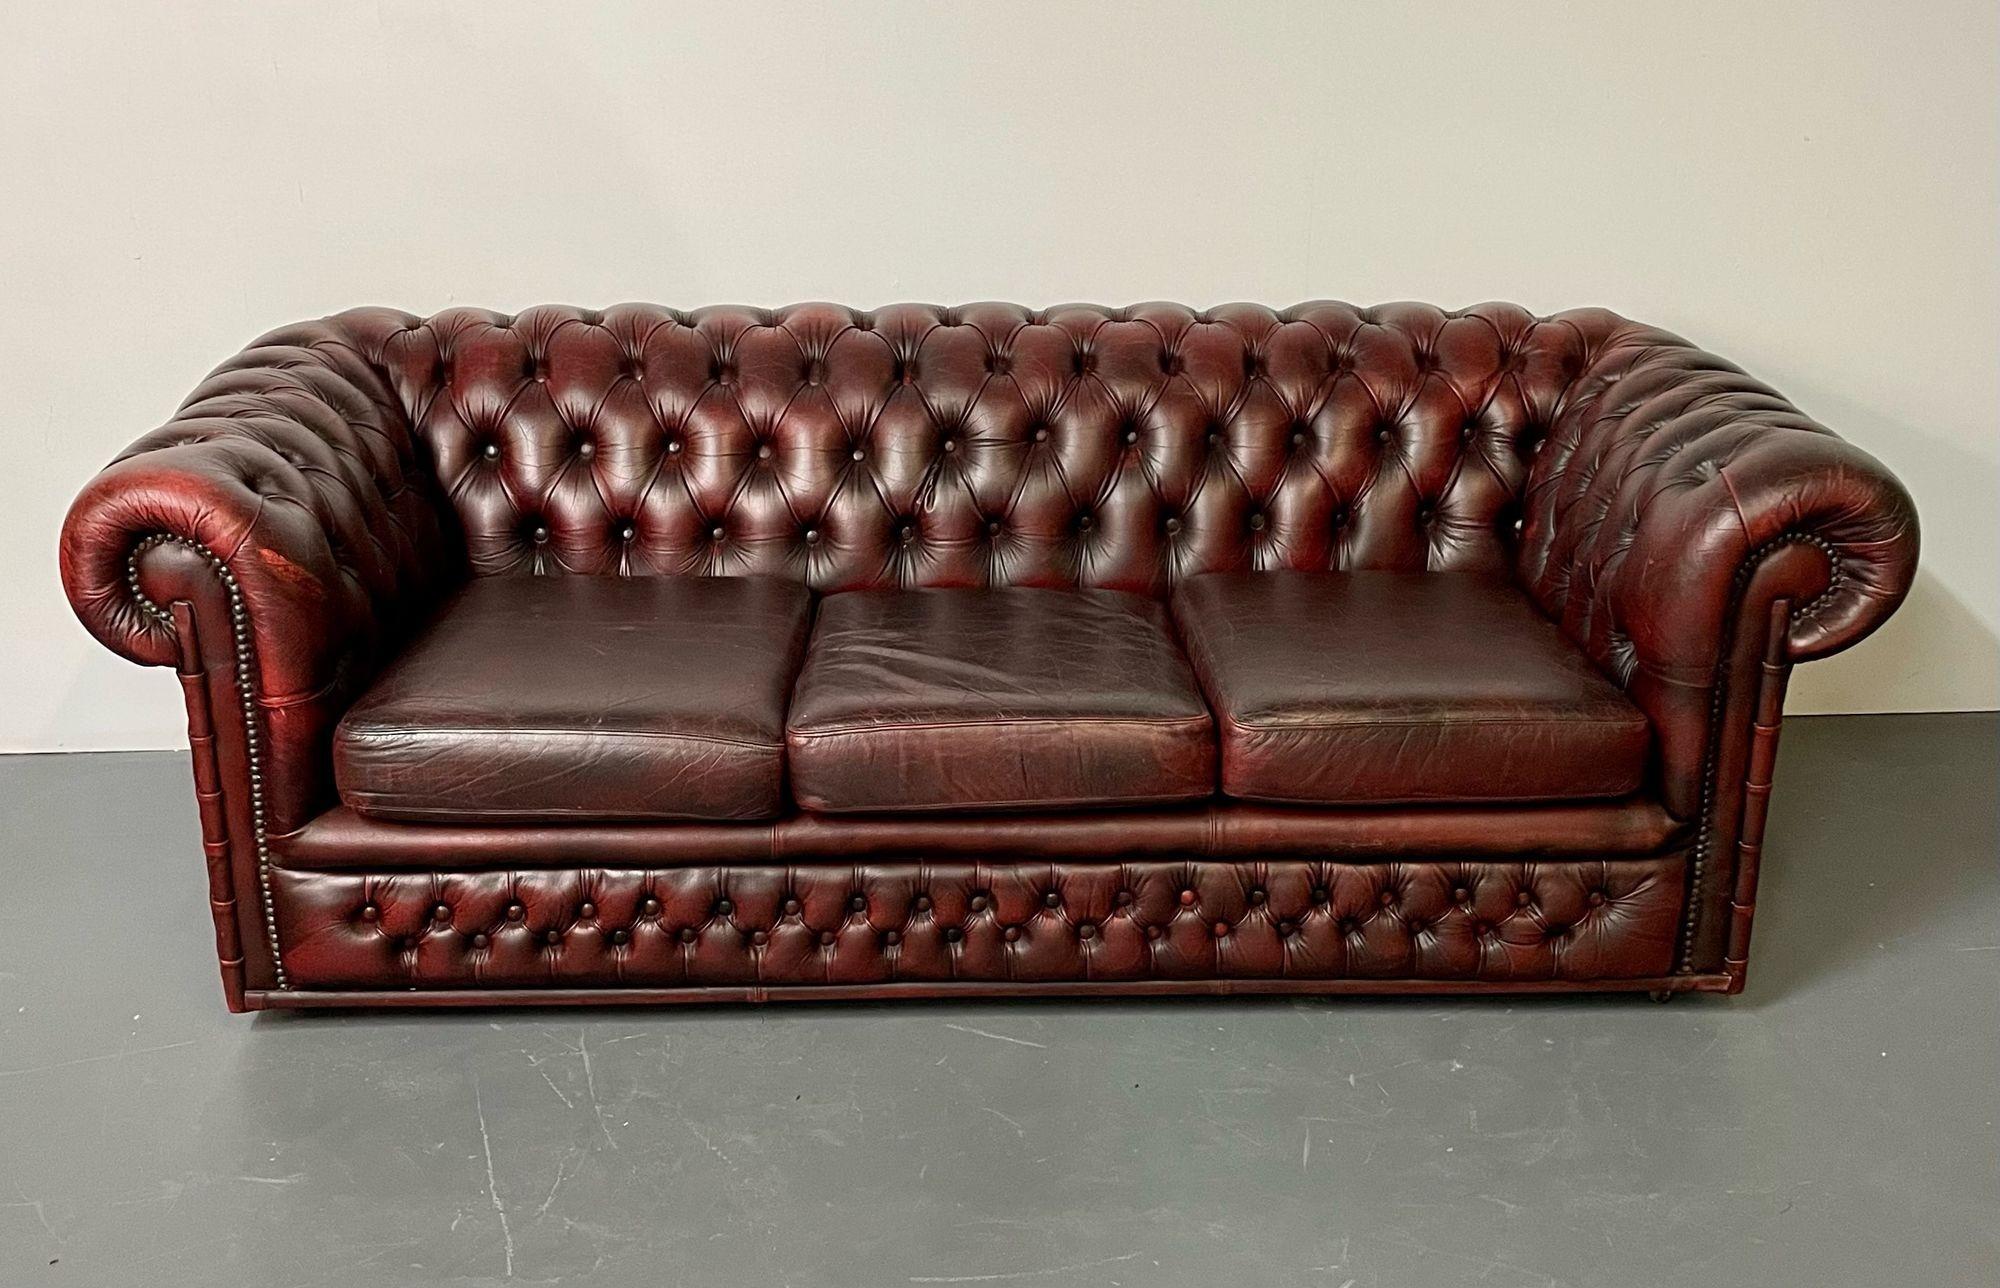 Georgian English oxblood red leather chesterfield sofa, faux bamboo front, tufted.
An English three seater Chesterfield sofa upholstered in oxblood red leather. Diamond tufted on the back and front skirt, secured with a brass nail-head trim.